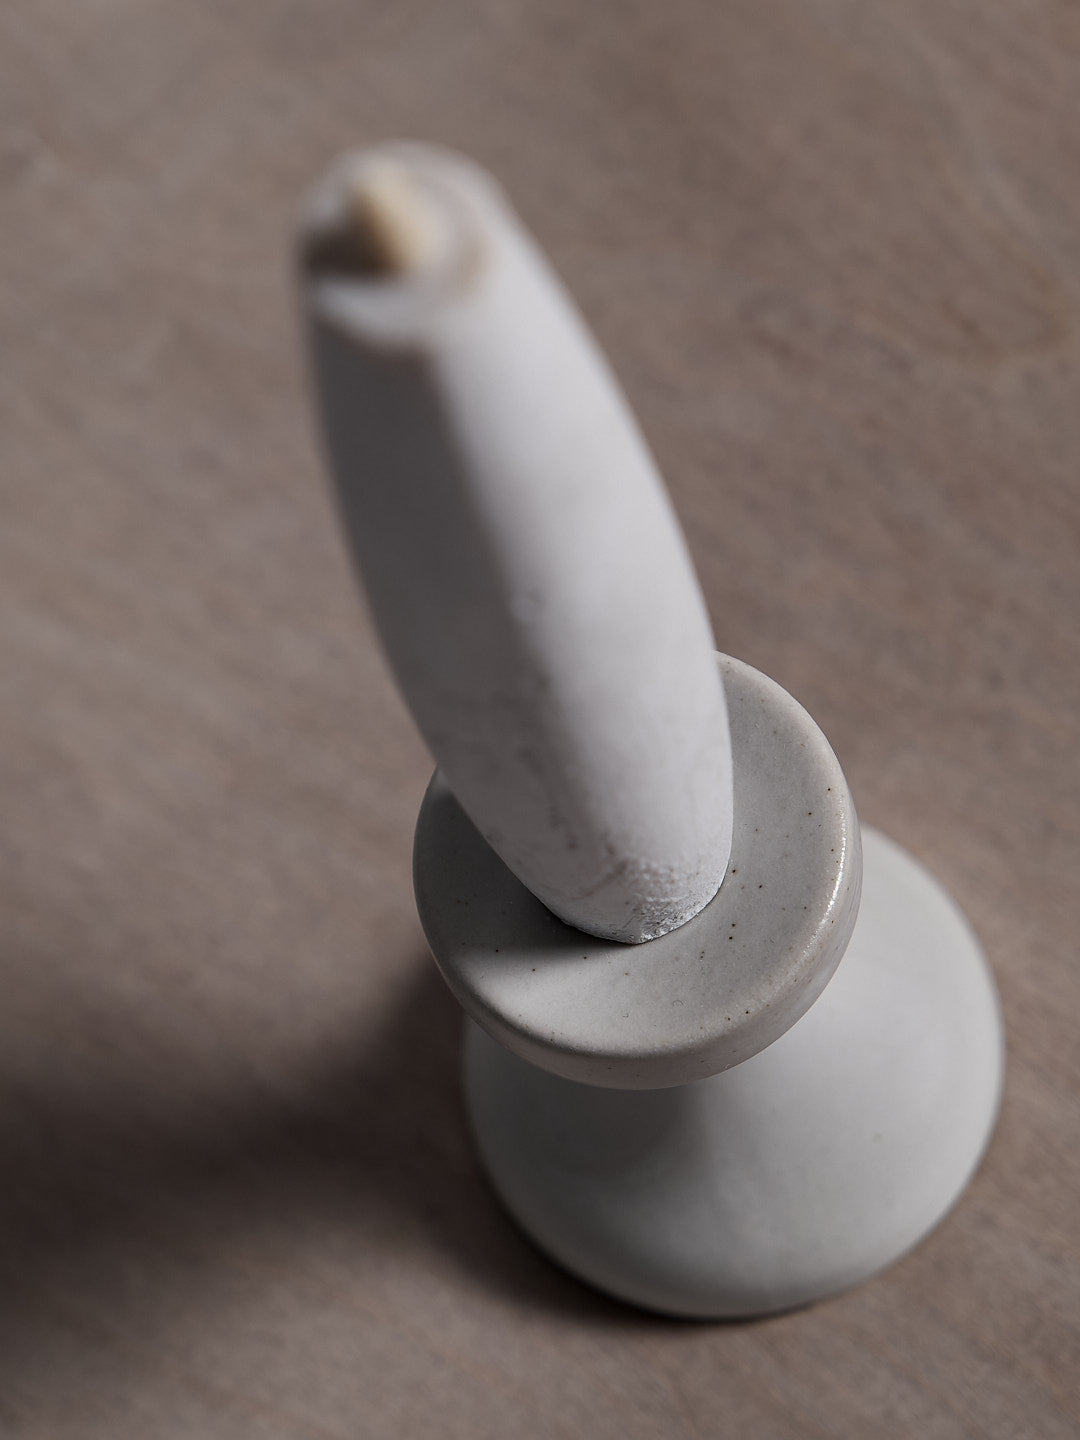 A small Takazawa Stoneware Candle Holder on a wooden table.